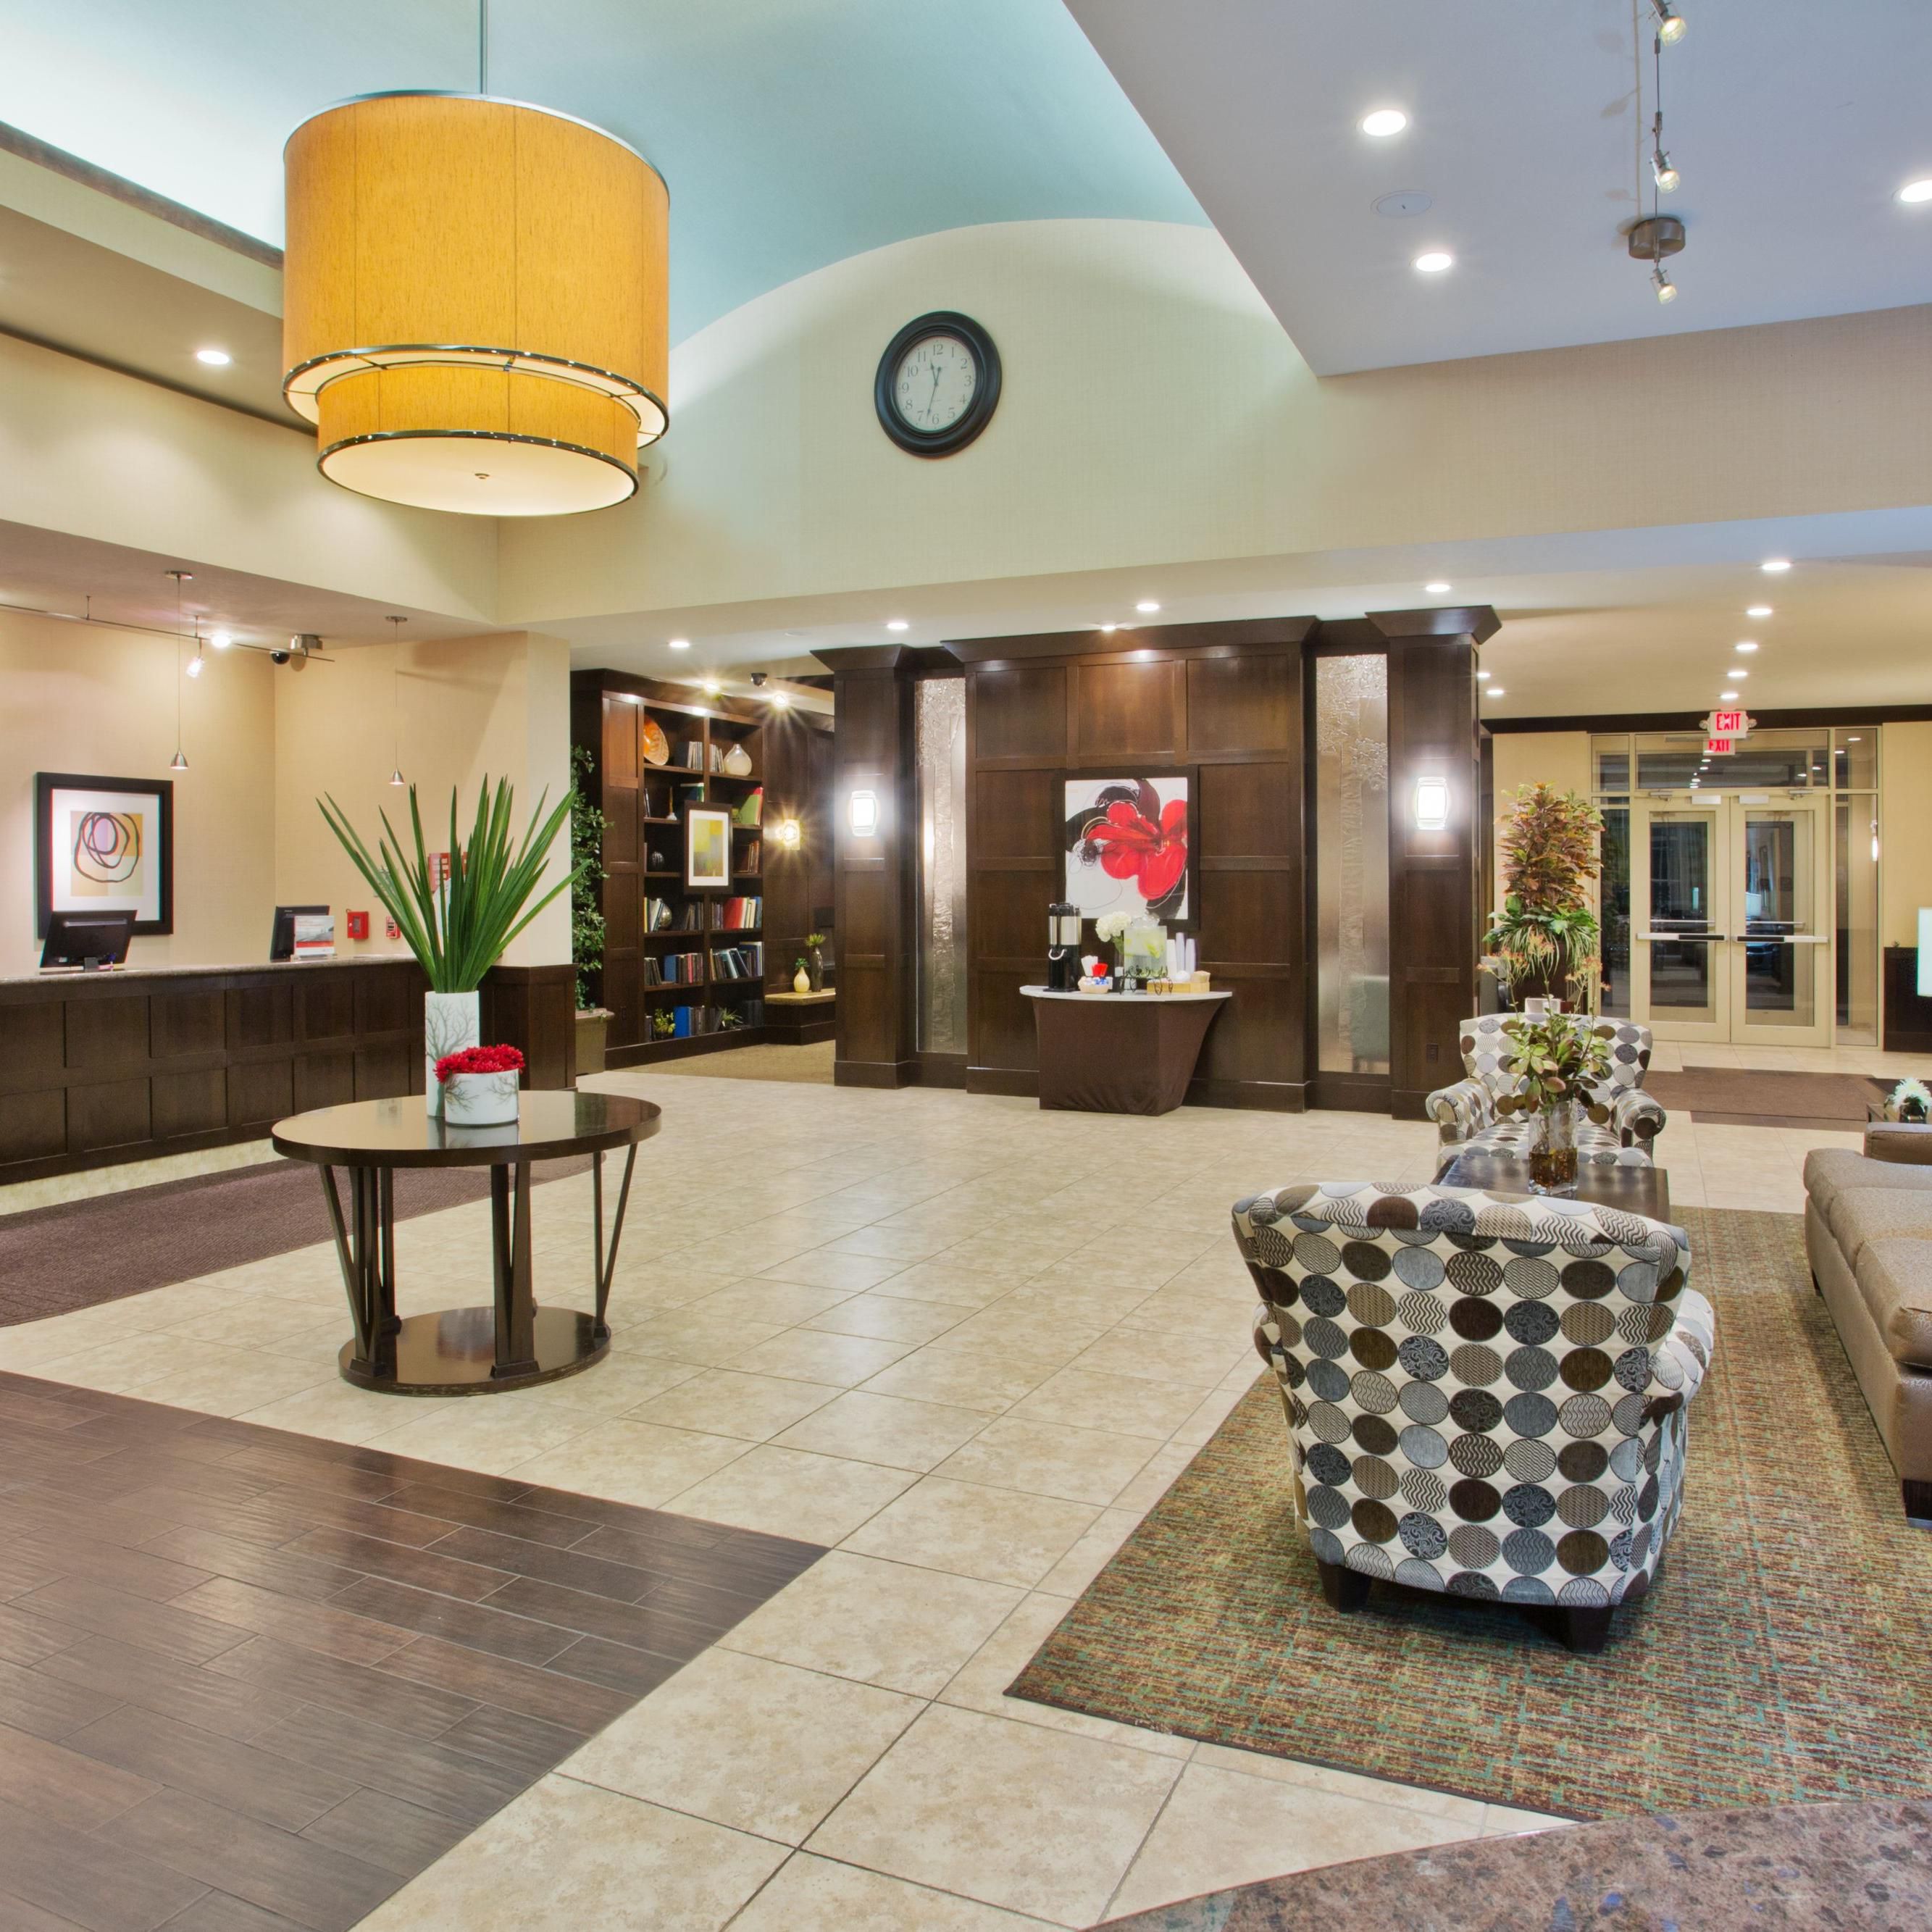 Our lobby is bright and welcoming